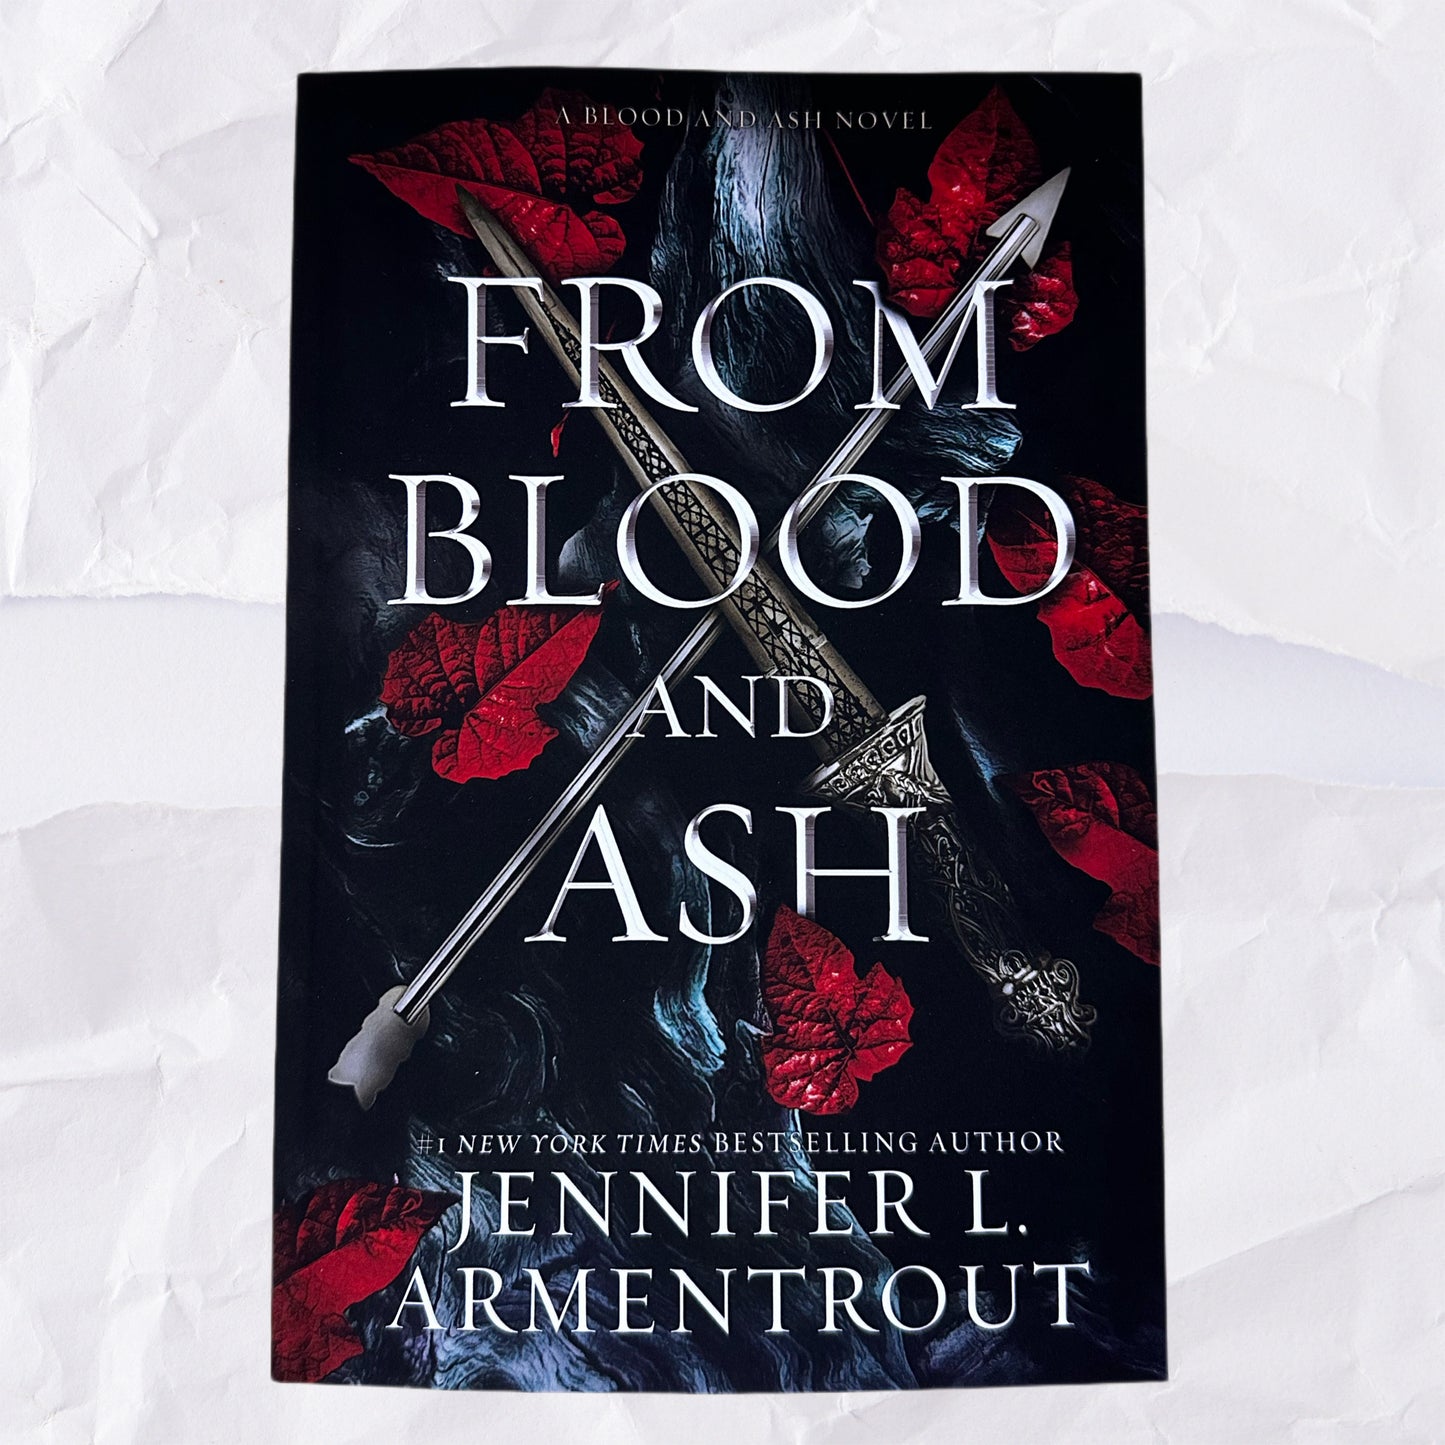 From Blood and Ash (Blood and Ash #1) by Jennifer L. Armentrout